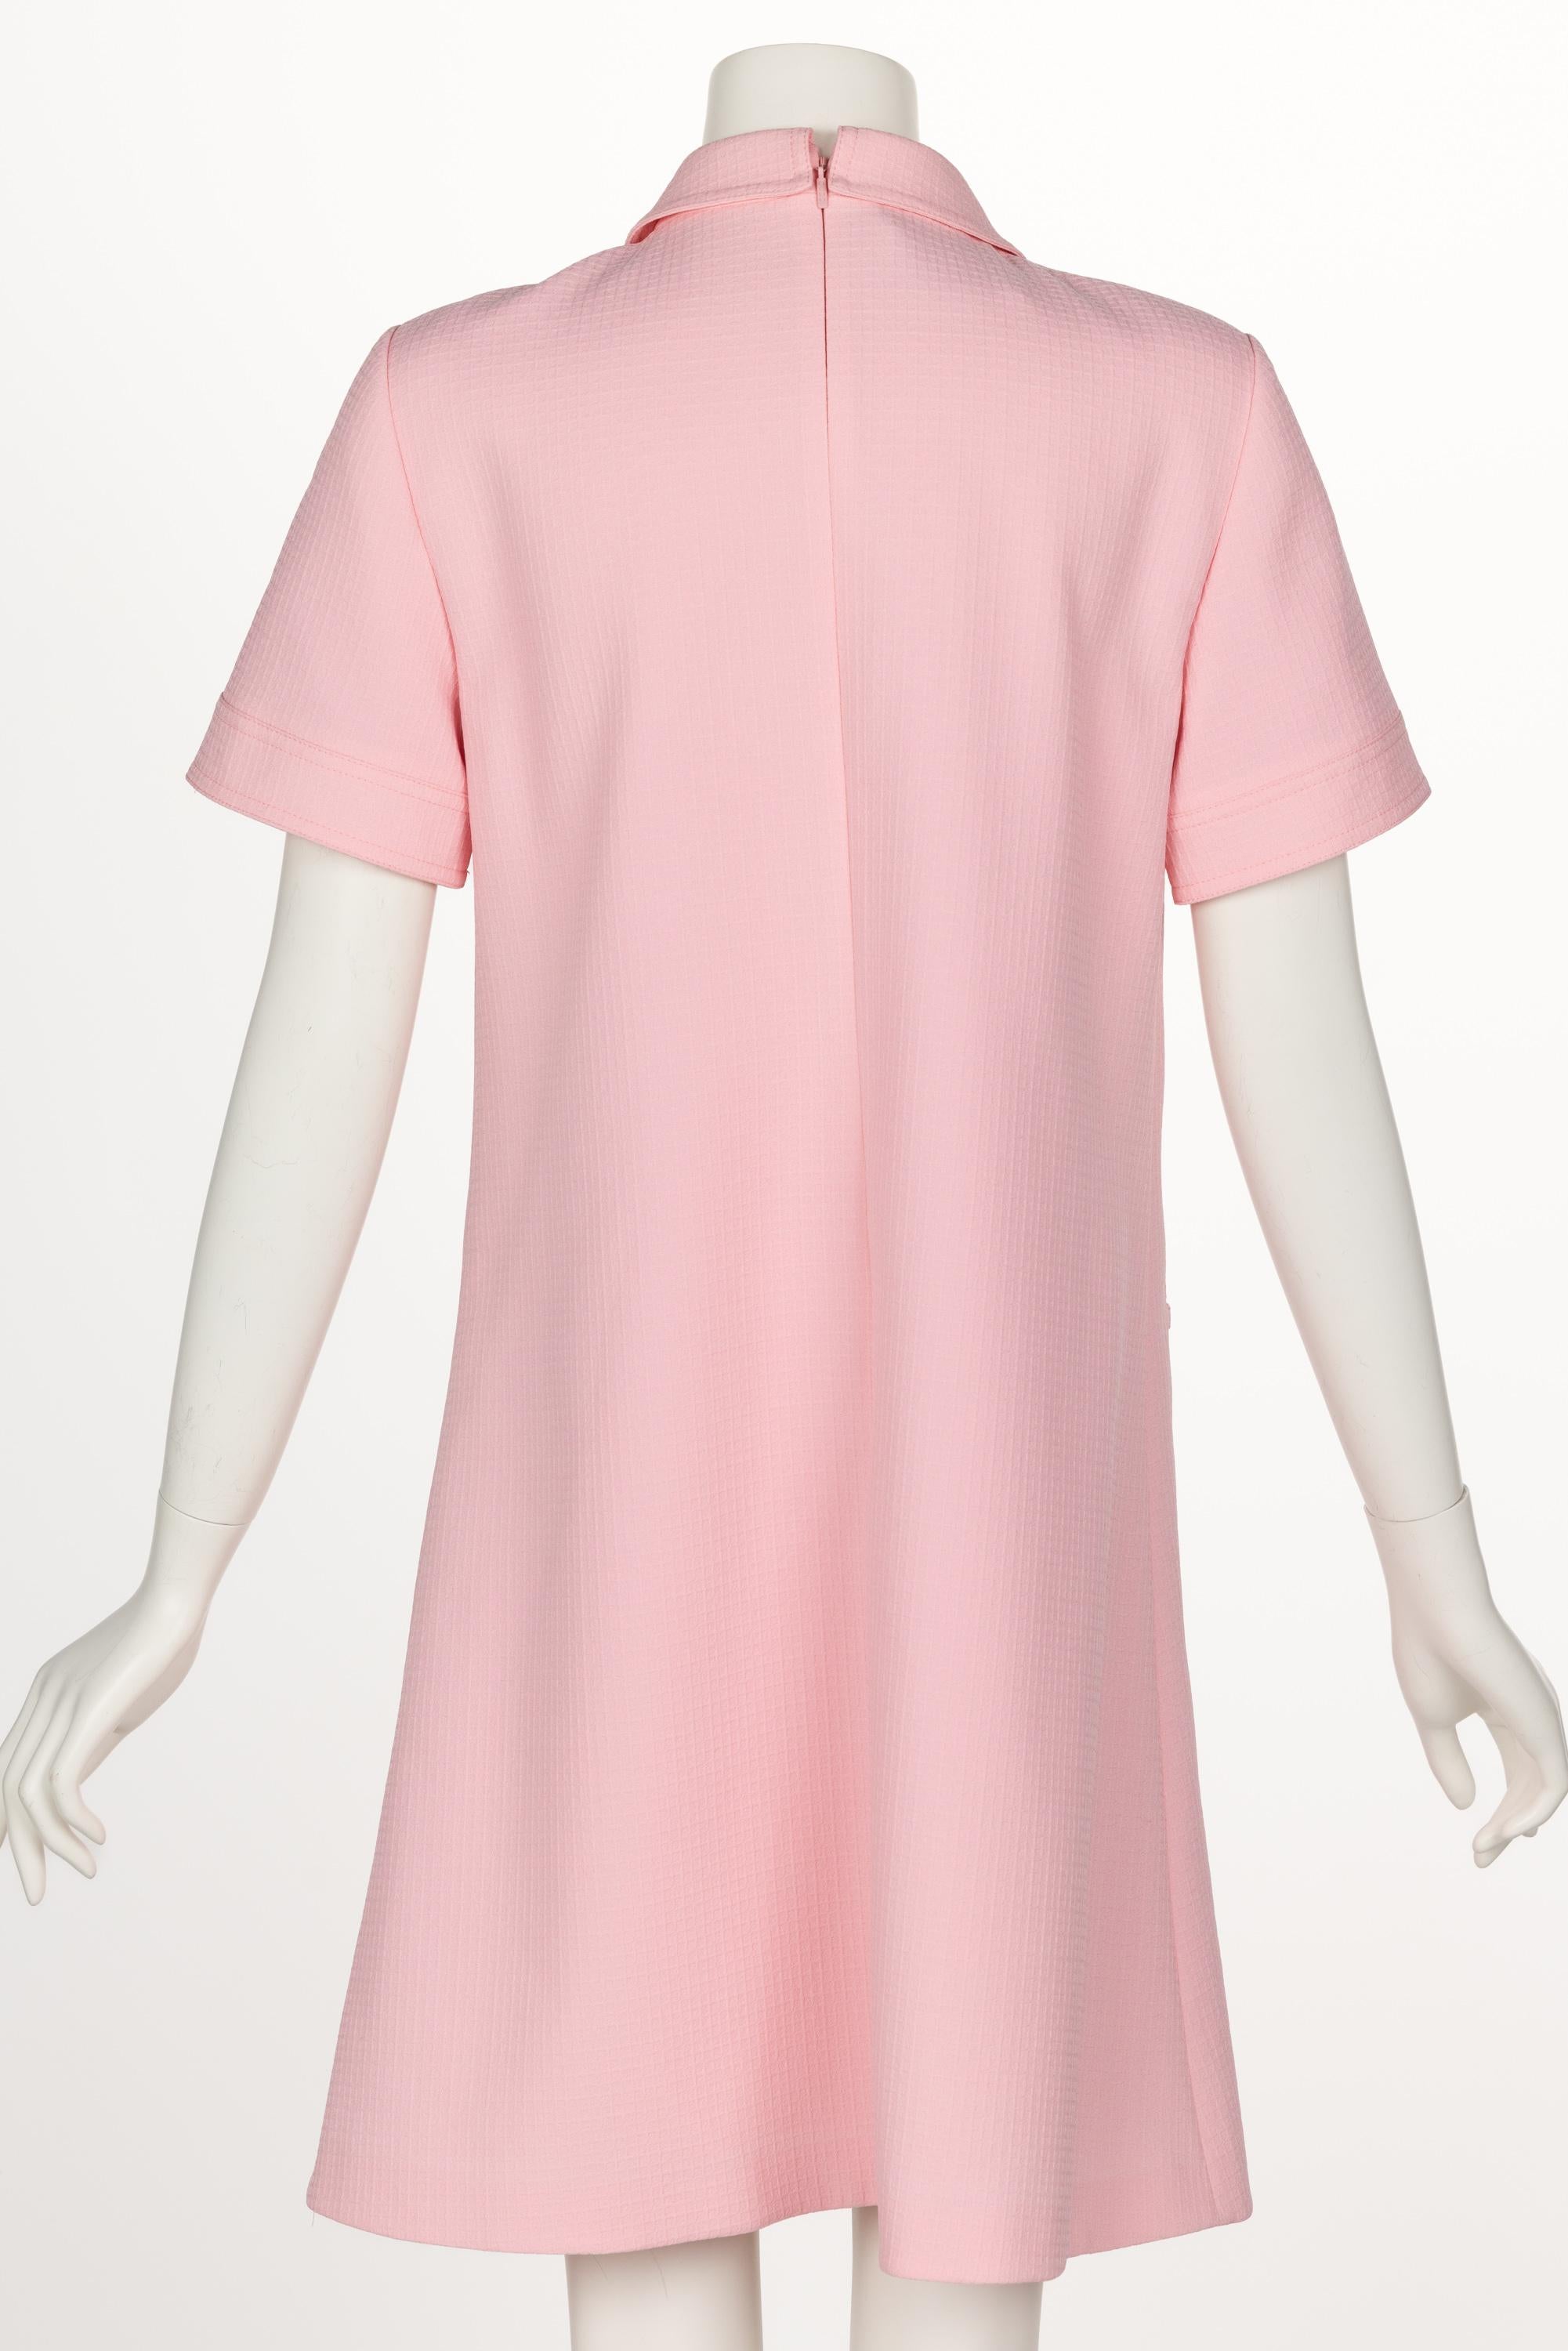 Women's Gucci Pink Textured Chain Trim Mini Polo Dress New w/ Tags For Sale